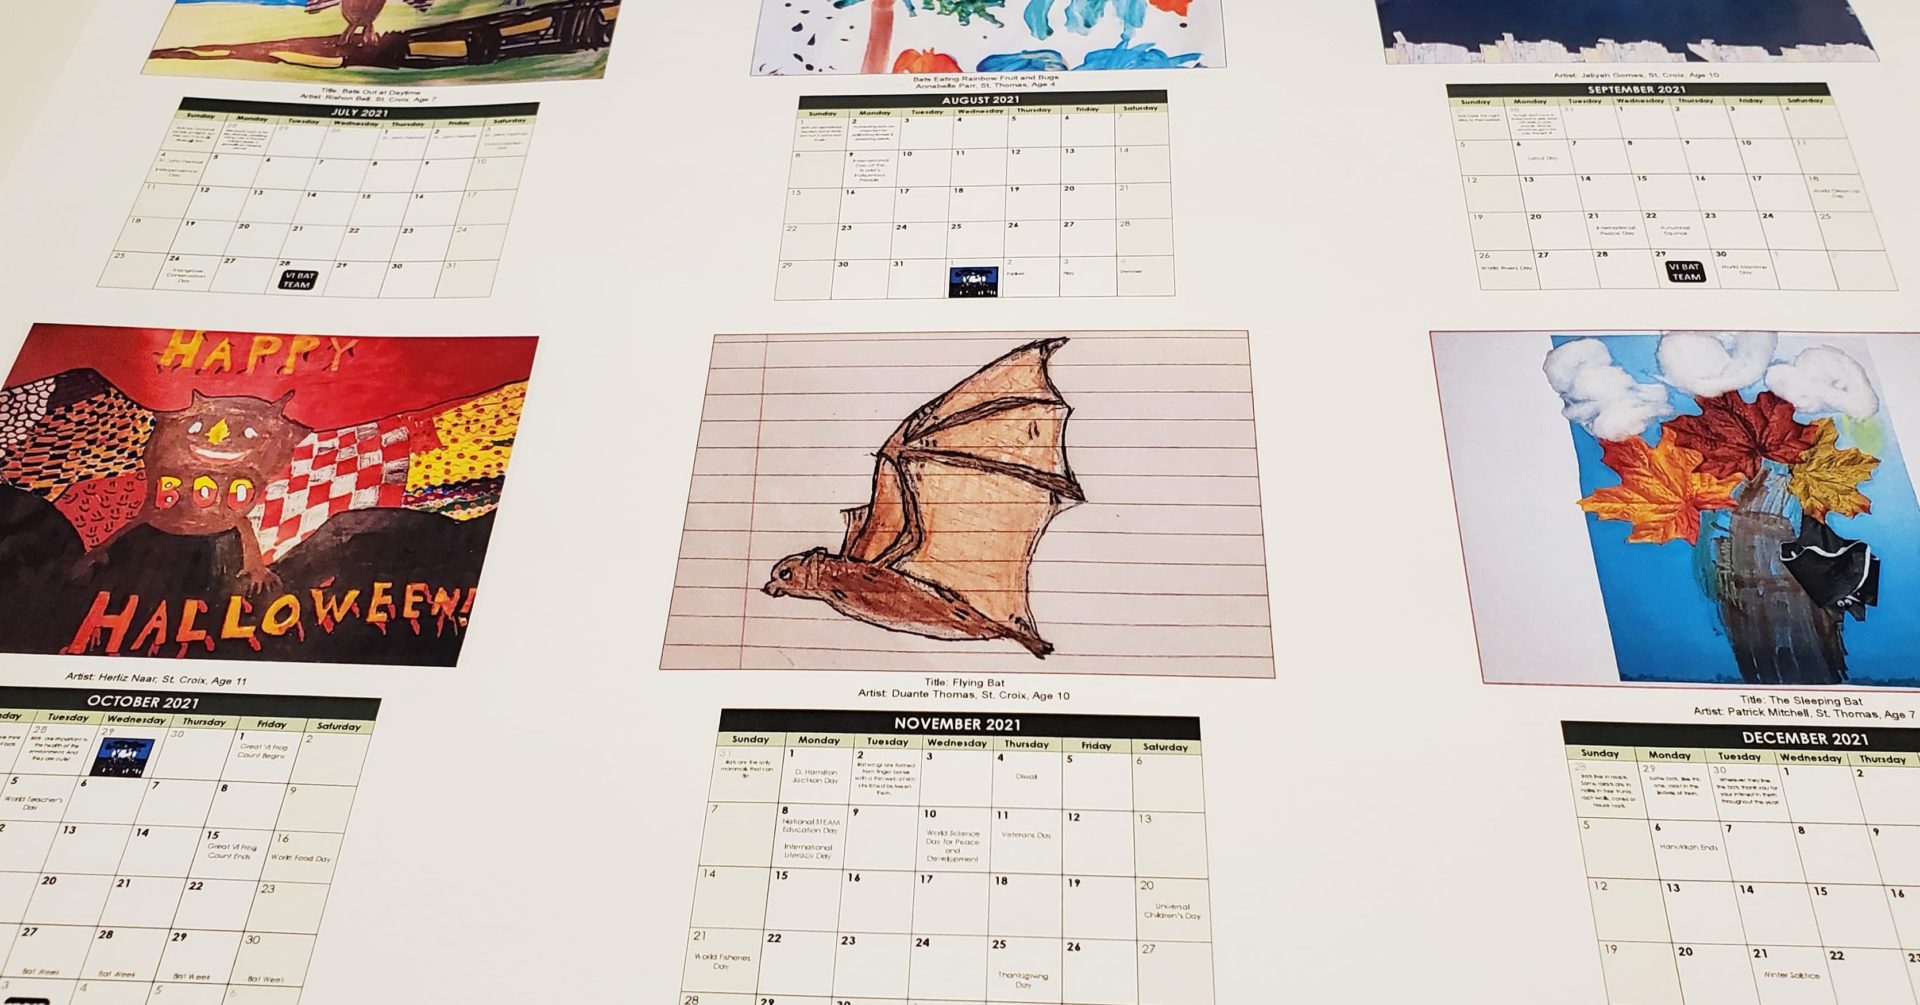 Bat Calendar Helps Support NonProfits by Pollinating the Population